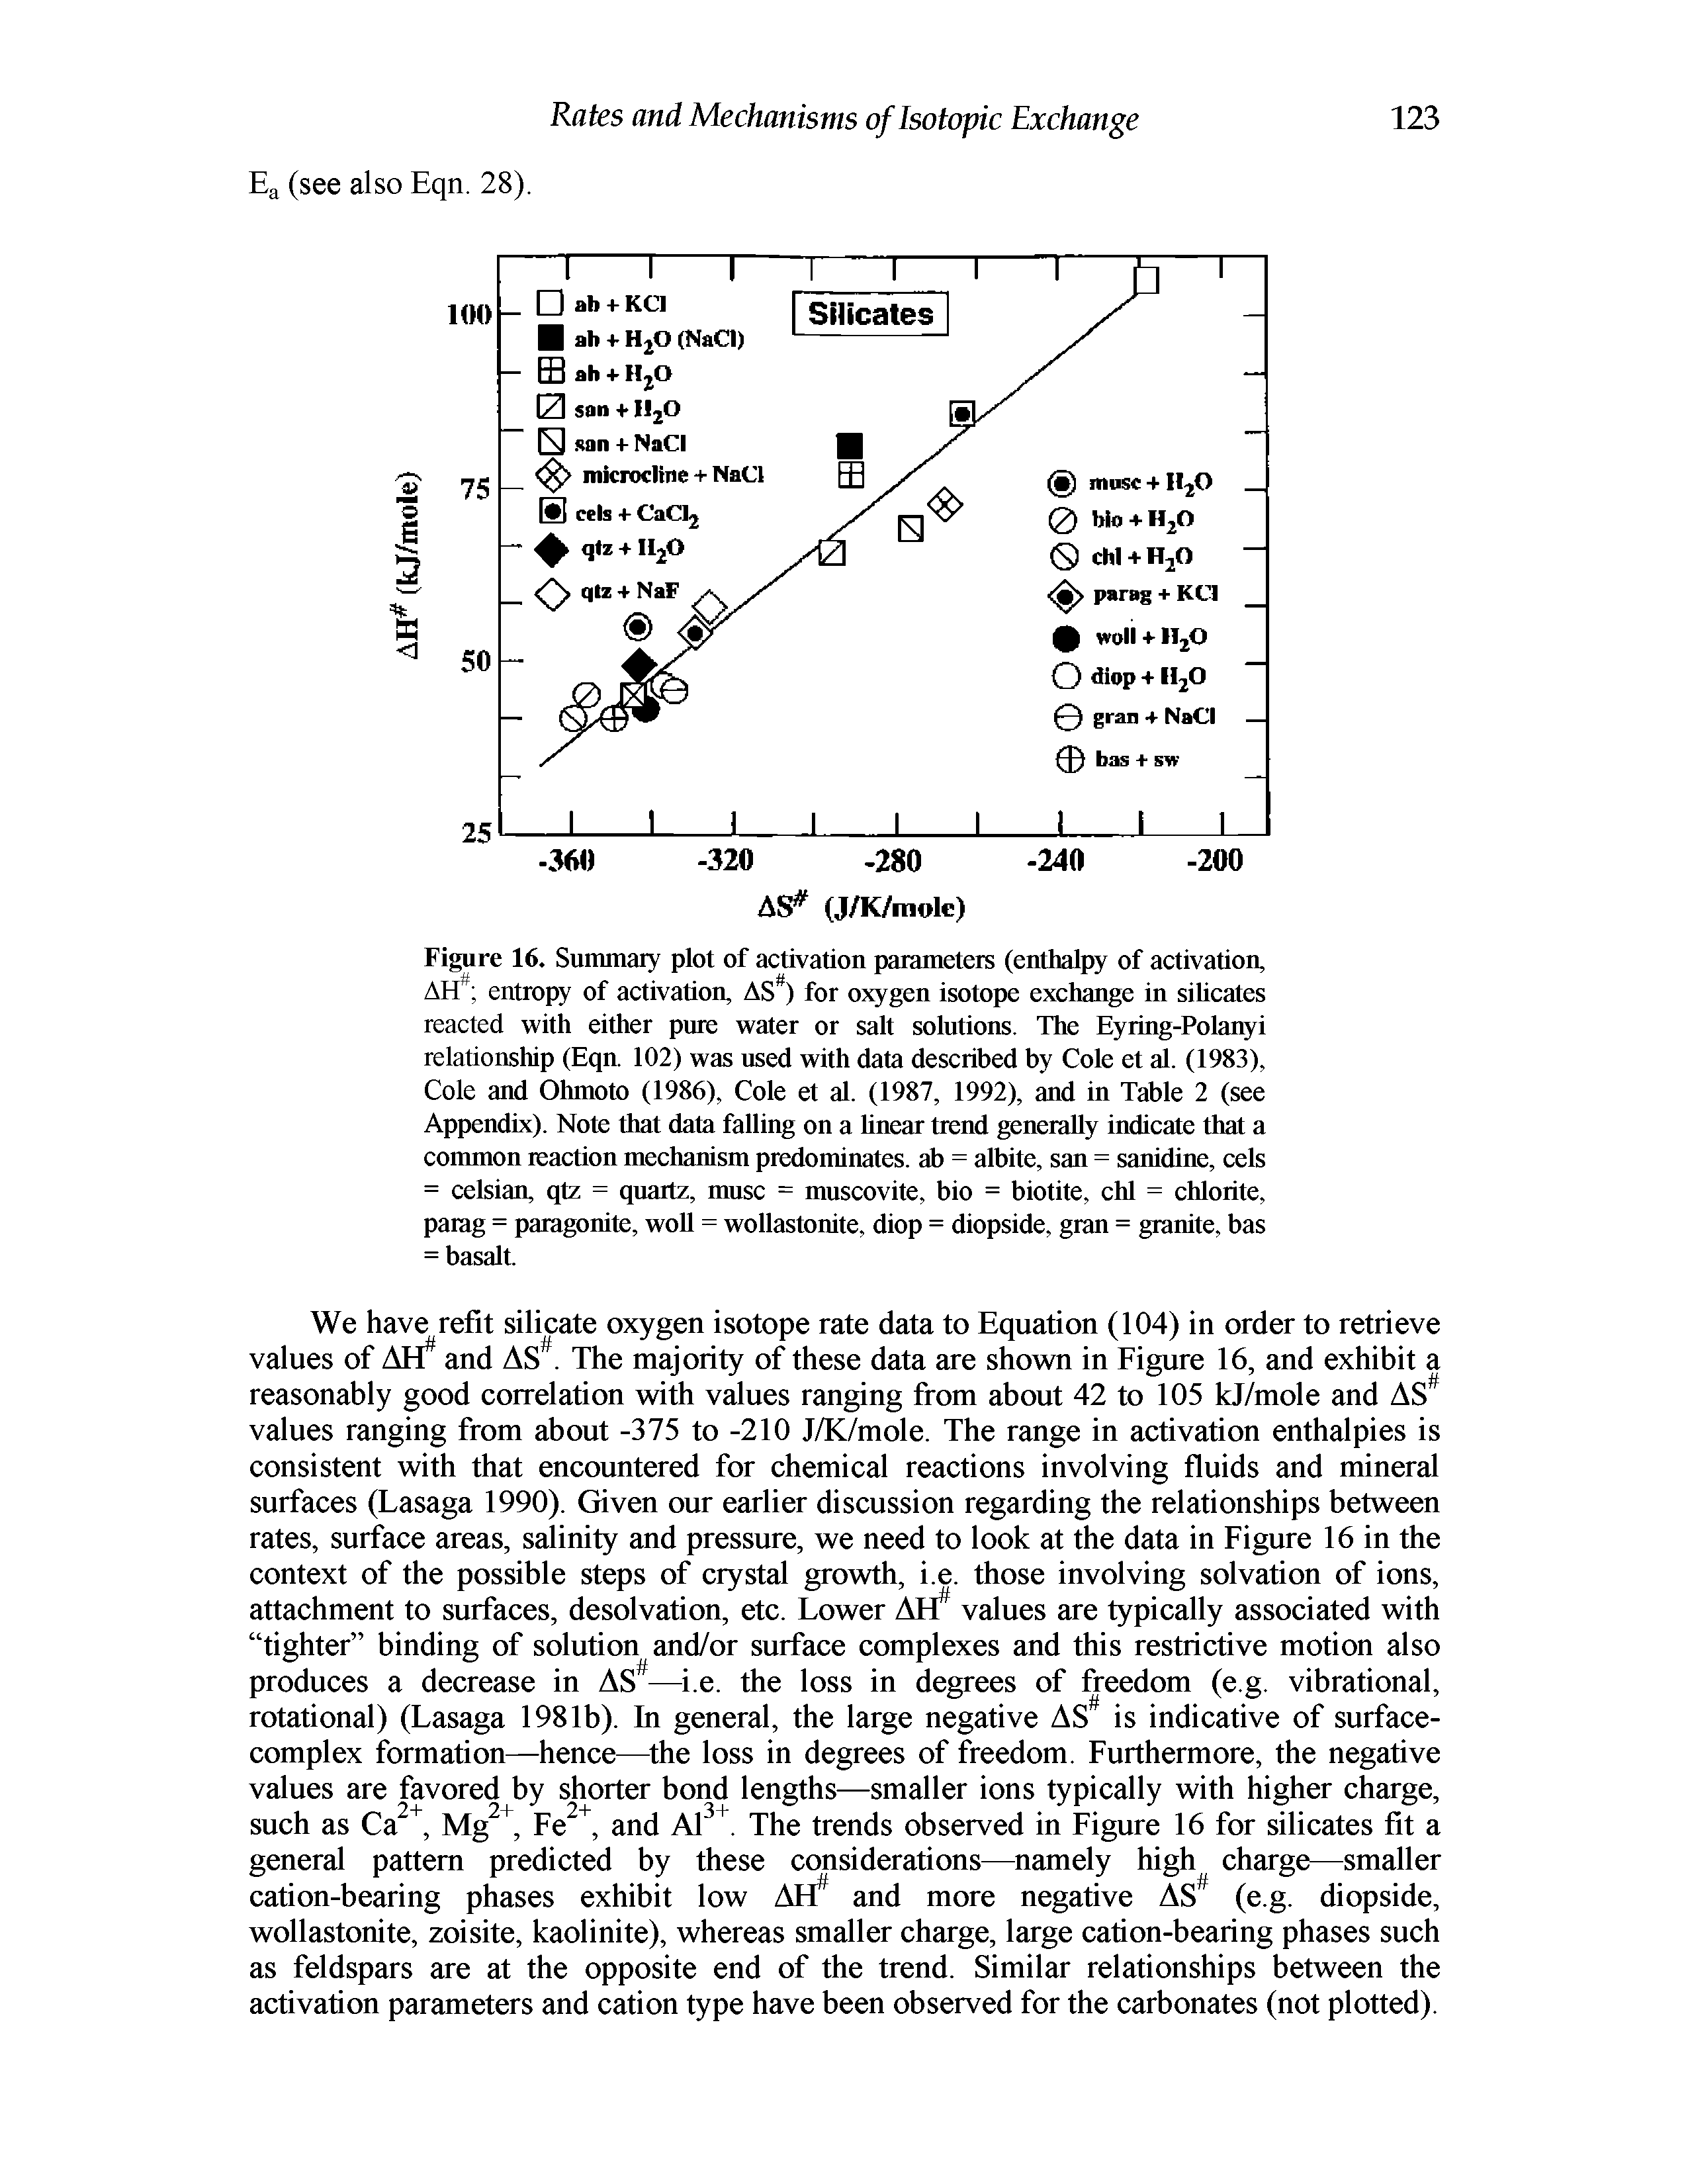 Figure 16. Summary plot of activation parameters (enthalpy of activation, AH entropy of activation, AS ) for oxygen isotope exehange in siUeates reacted with either pure water or salt solntions. The Eyring-Polanyi relationship (Eqn. 102) was nsed with data described by Cole et al. (1983), Cole and Ohmoto (1986), Cole et al. (1987, 1992), and in Table 2 (see Appendix). Note that data falling on a hnear trend generally indieate that a conunon leaetion meehanism predominates, ab = albite, san = sanidine, eels = celsian, qtz = qnartz, mnsc = muscovite, bio = biotite, chi = chlorite, parag = paragonite, woll = wollastonite, diop = diopside, gran = granite, bas = basalt.